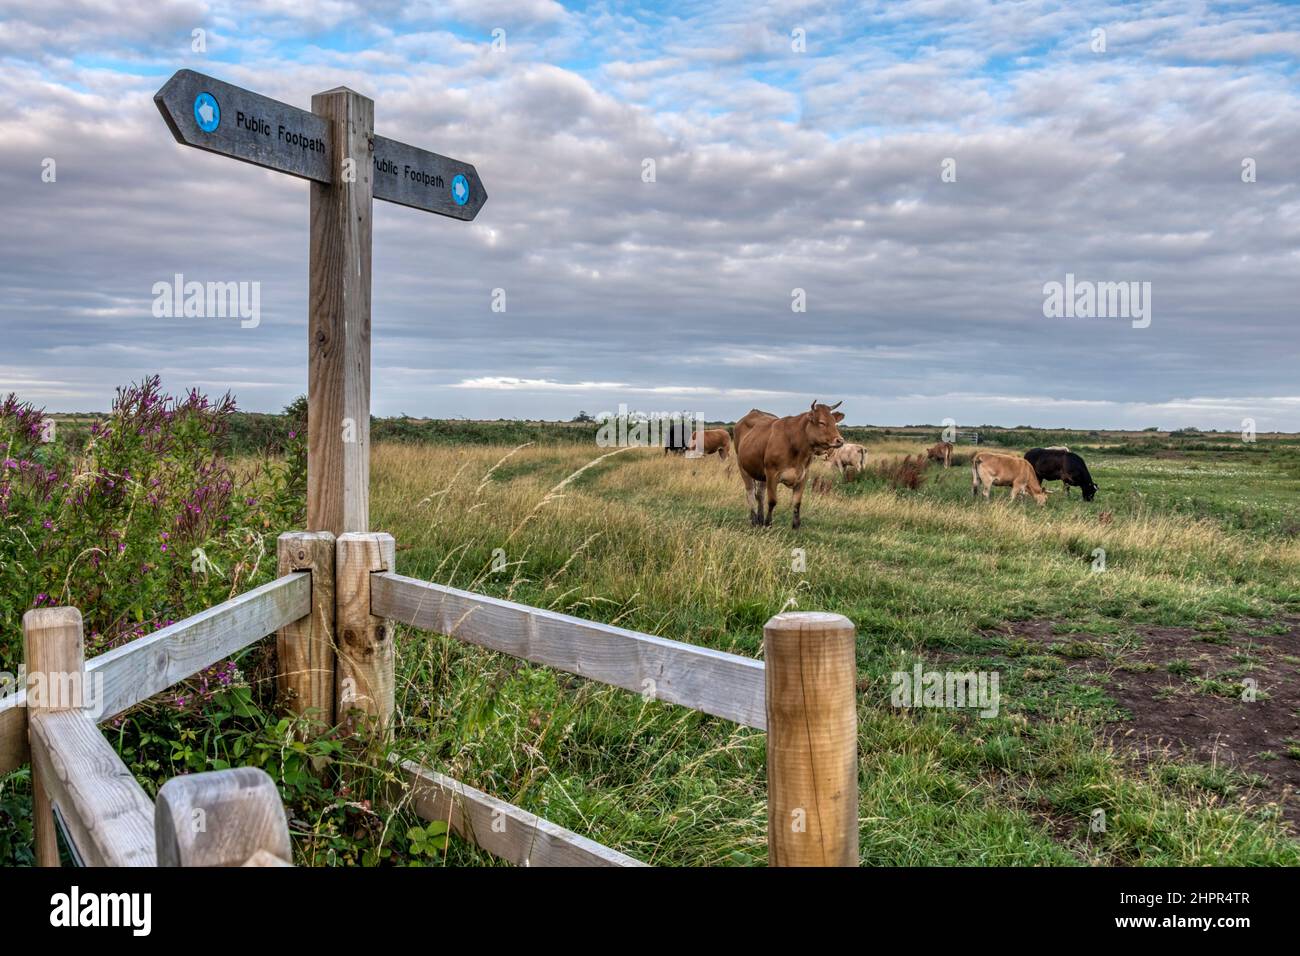 Public footpath across field with grazing cows. Stock Photo